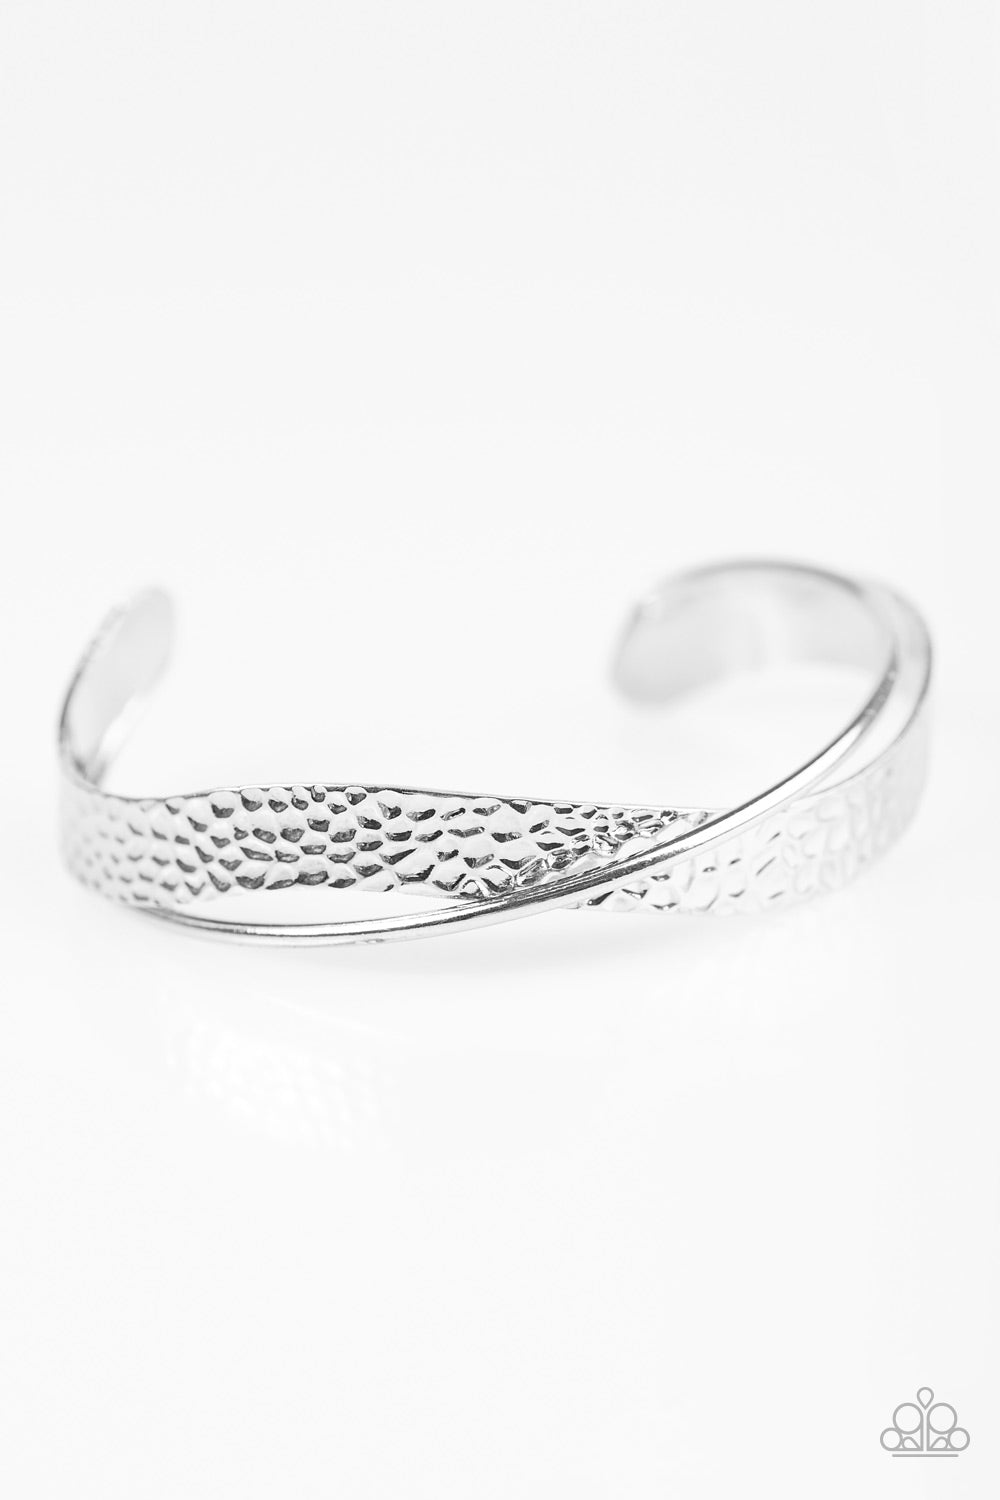 WANDERING WAVES - SILVER HAMMERED TWISTED CUFF BRACELET